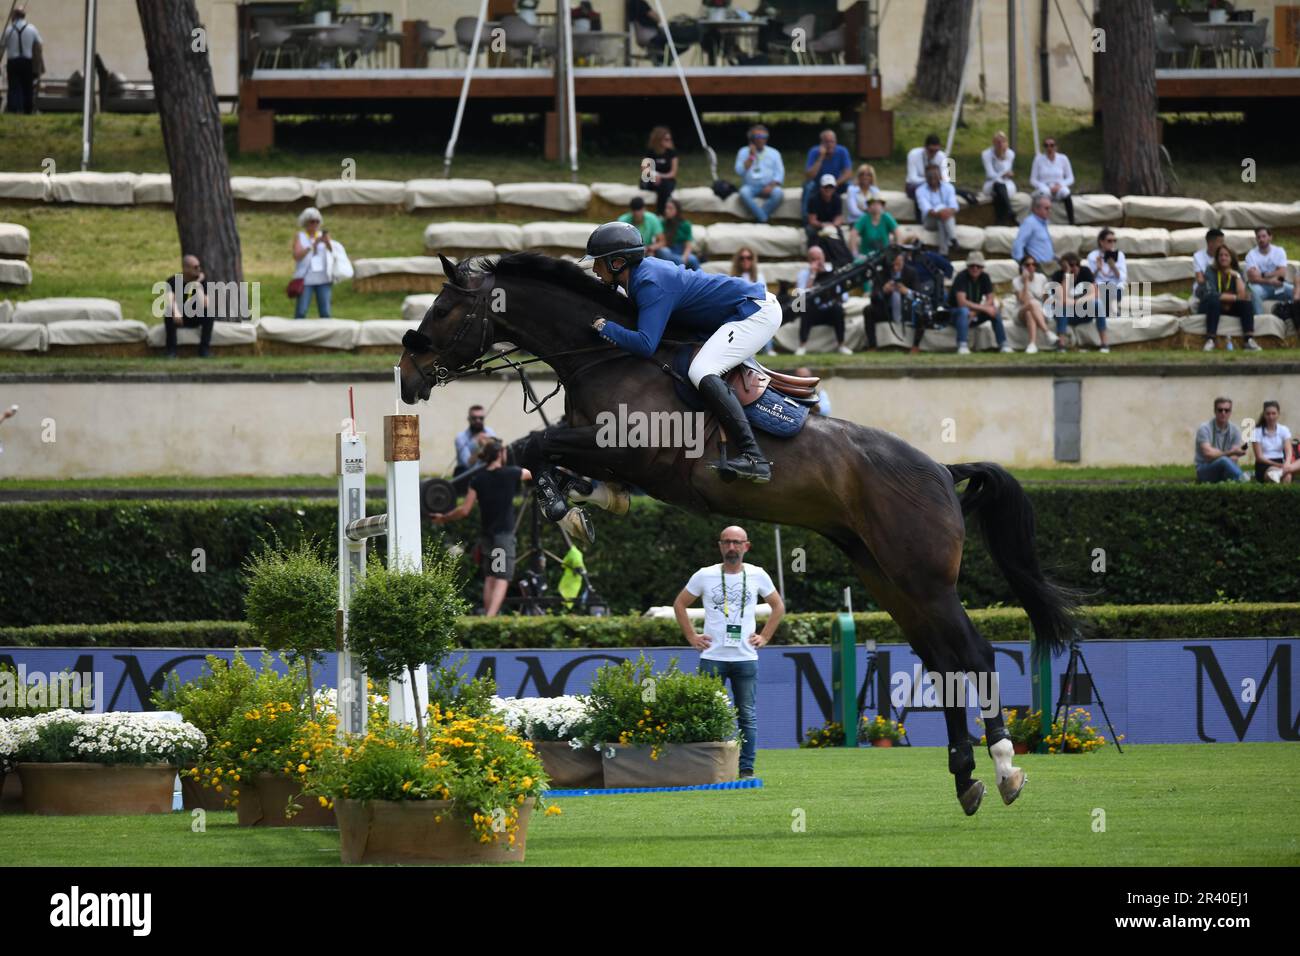 CSIO Roma 2023, Piazza di Siena, Rome, Italy, may 25 2023. Equestrian jumping competition Tab A against the clock, Martin Fuchs (SUI) jumping. Photo Credit: Fabio Pagani/Alamy Live News Stock Photo